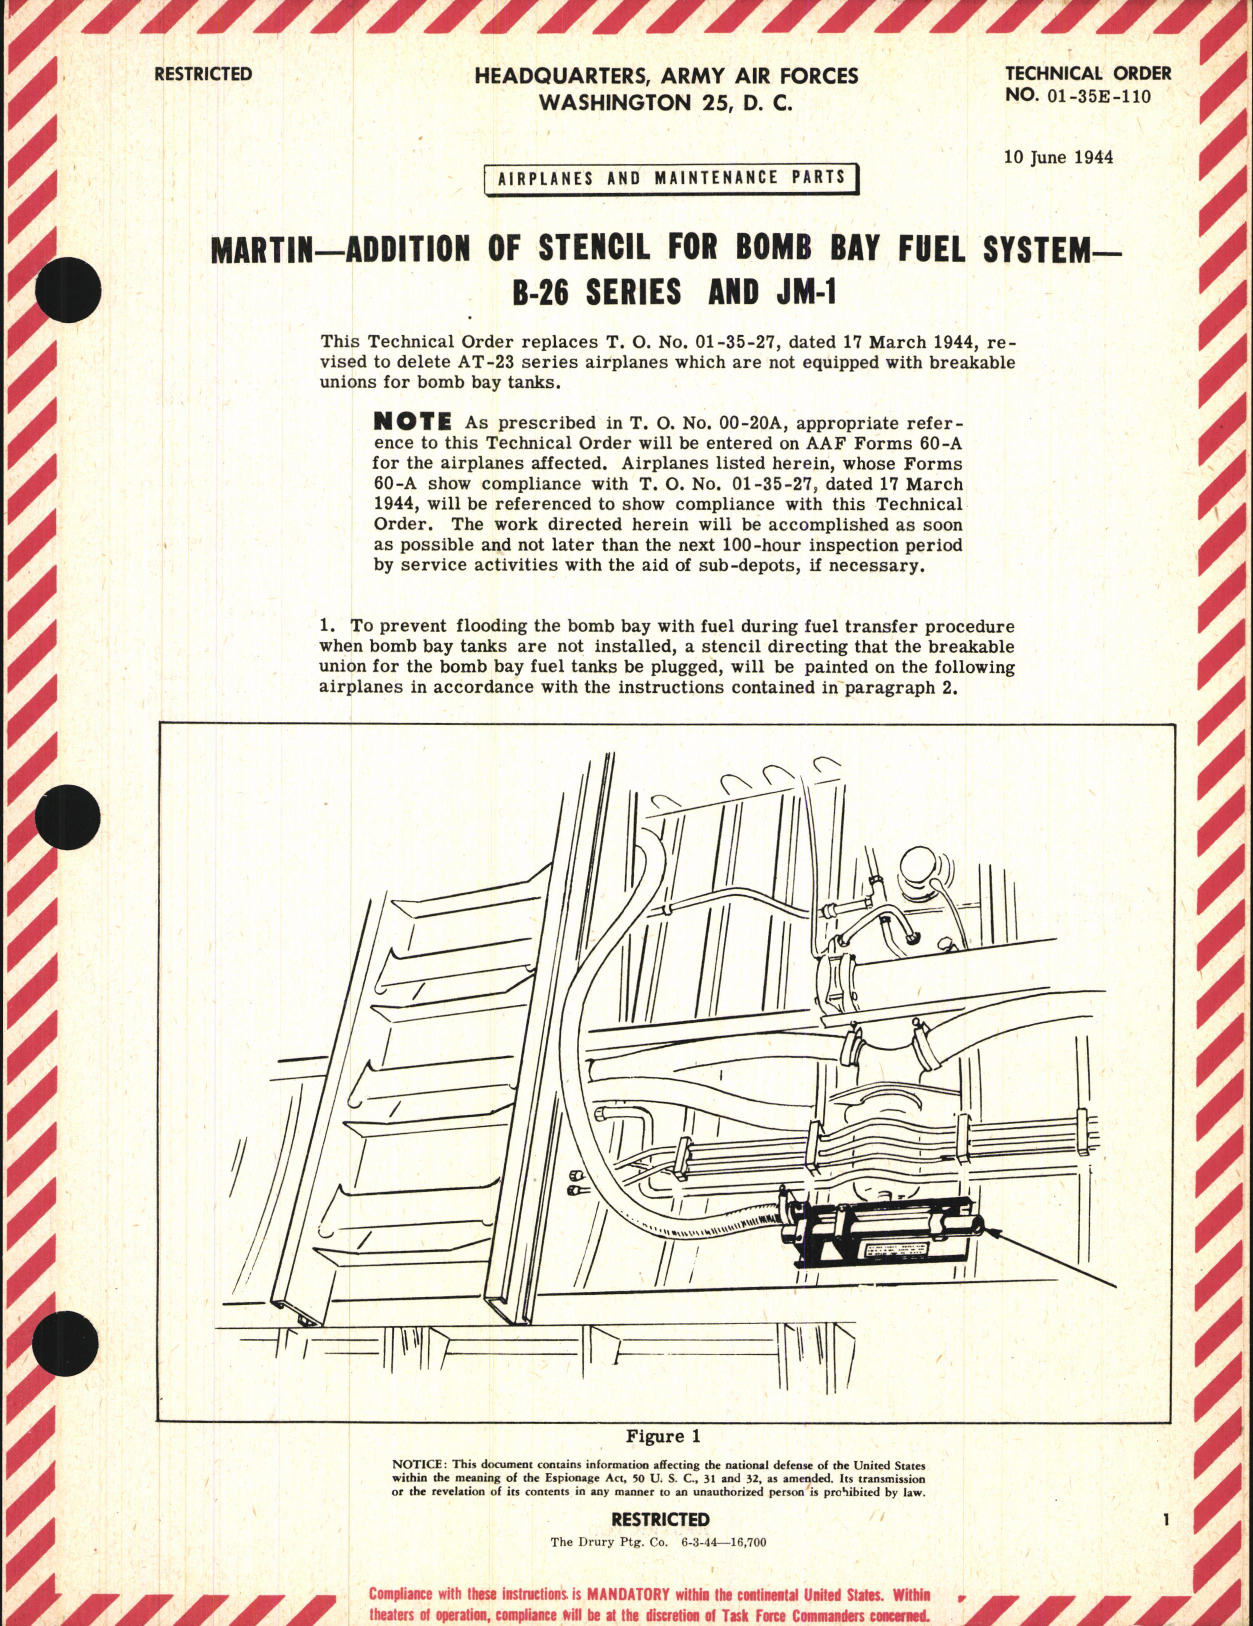 Sample page 1 from AirCorps Library document: Addition of Stencil for Bomb Bay Fuel System for B-26 Series and JM-1